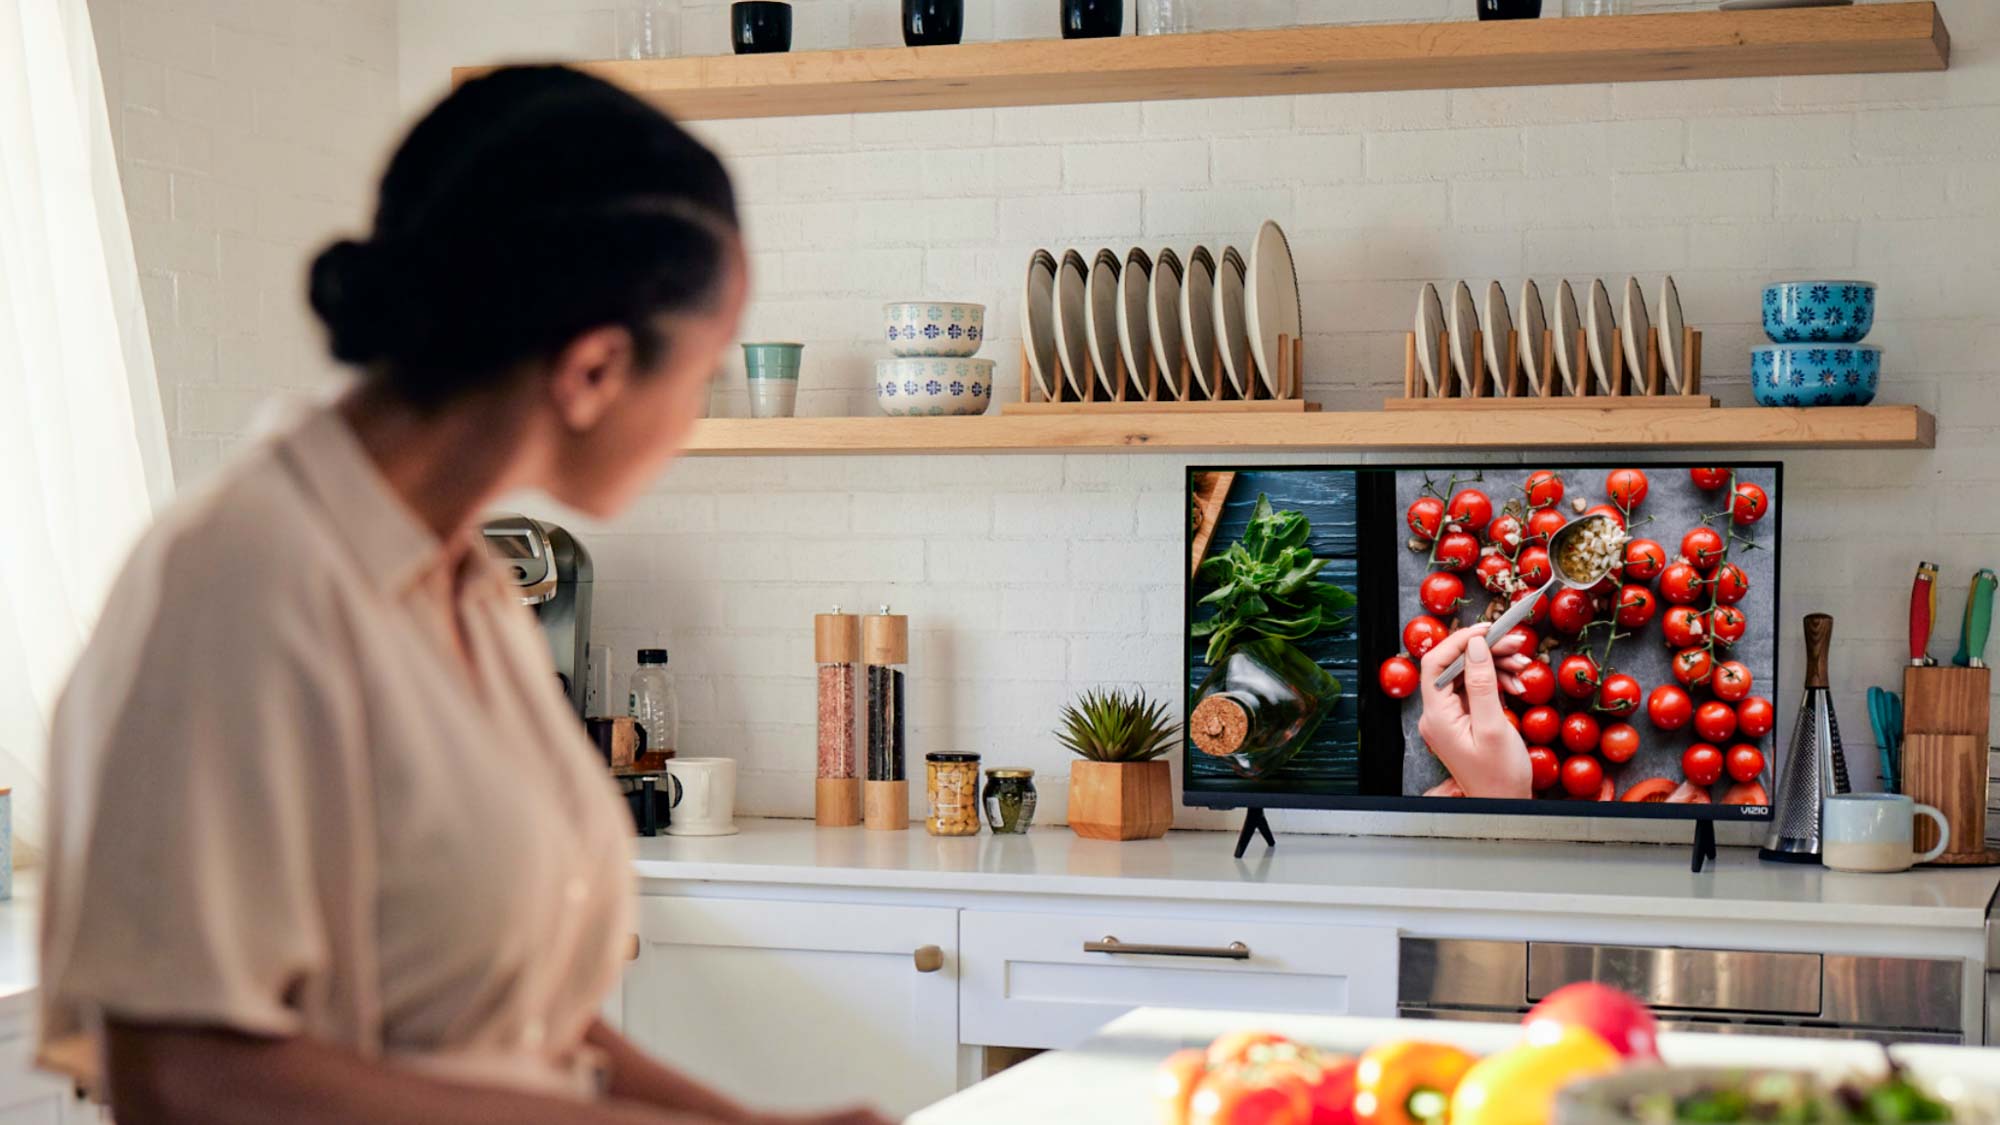 VIZIO 40 D-Series LED Smart TV with 3-Year Coverage